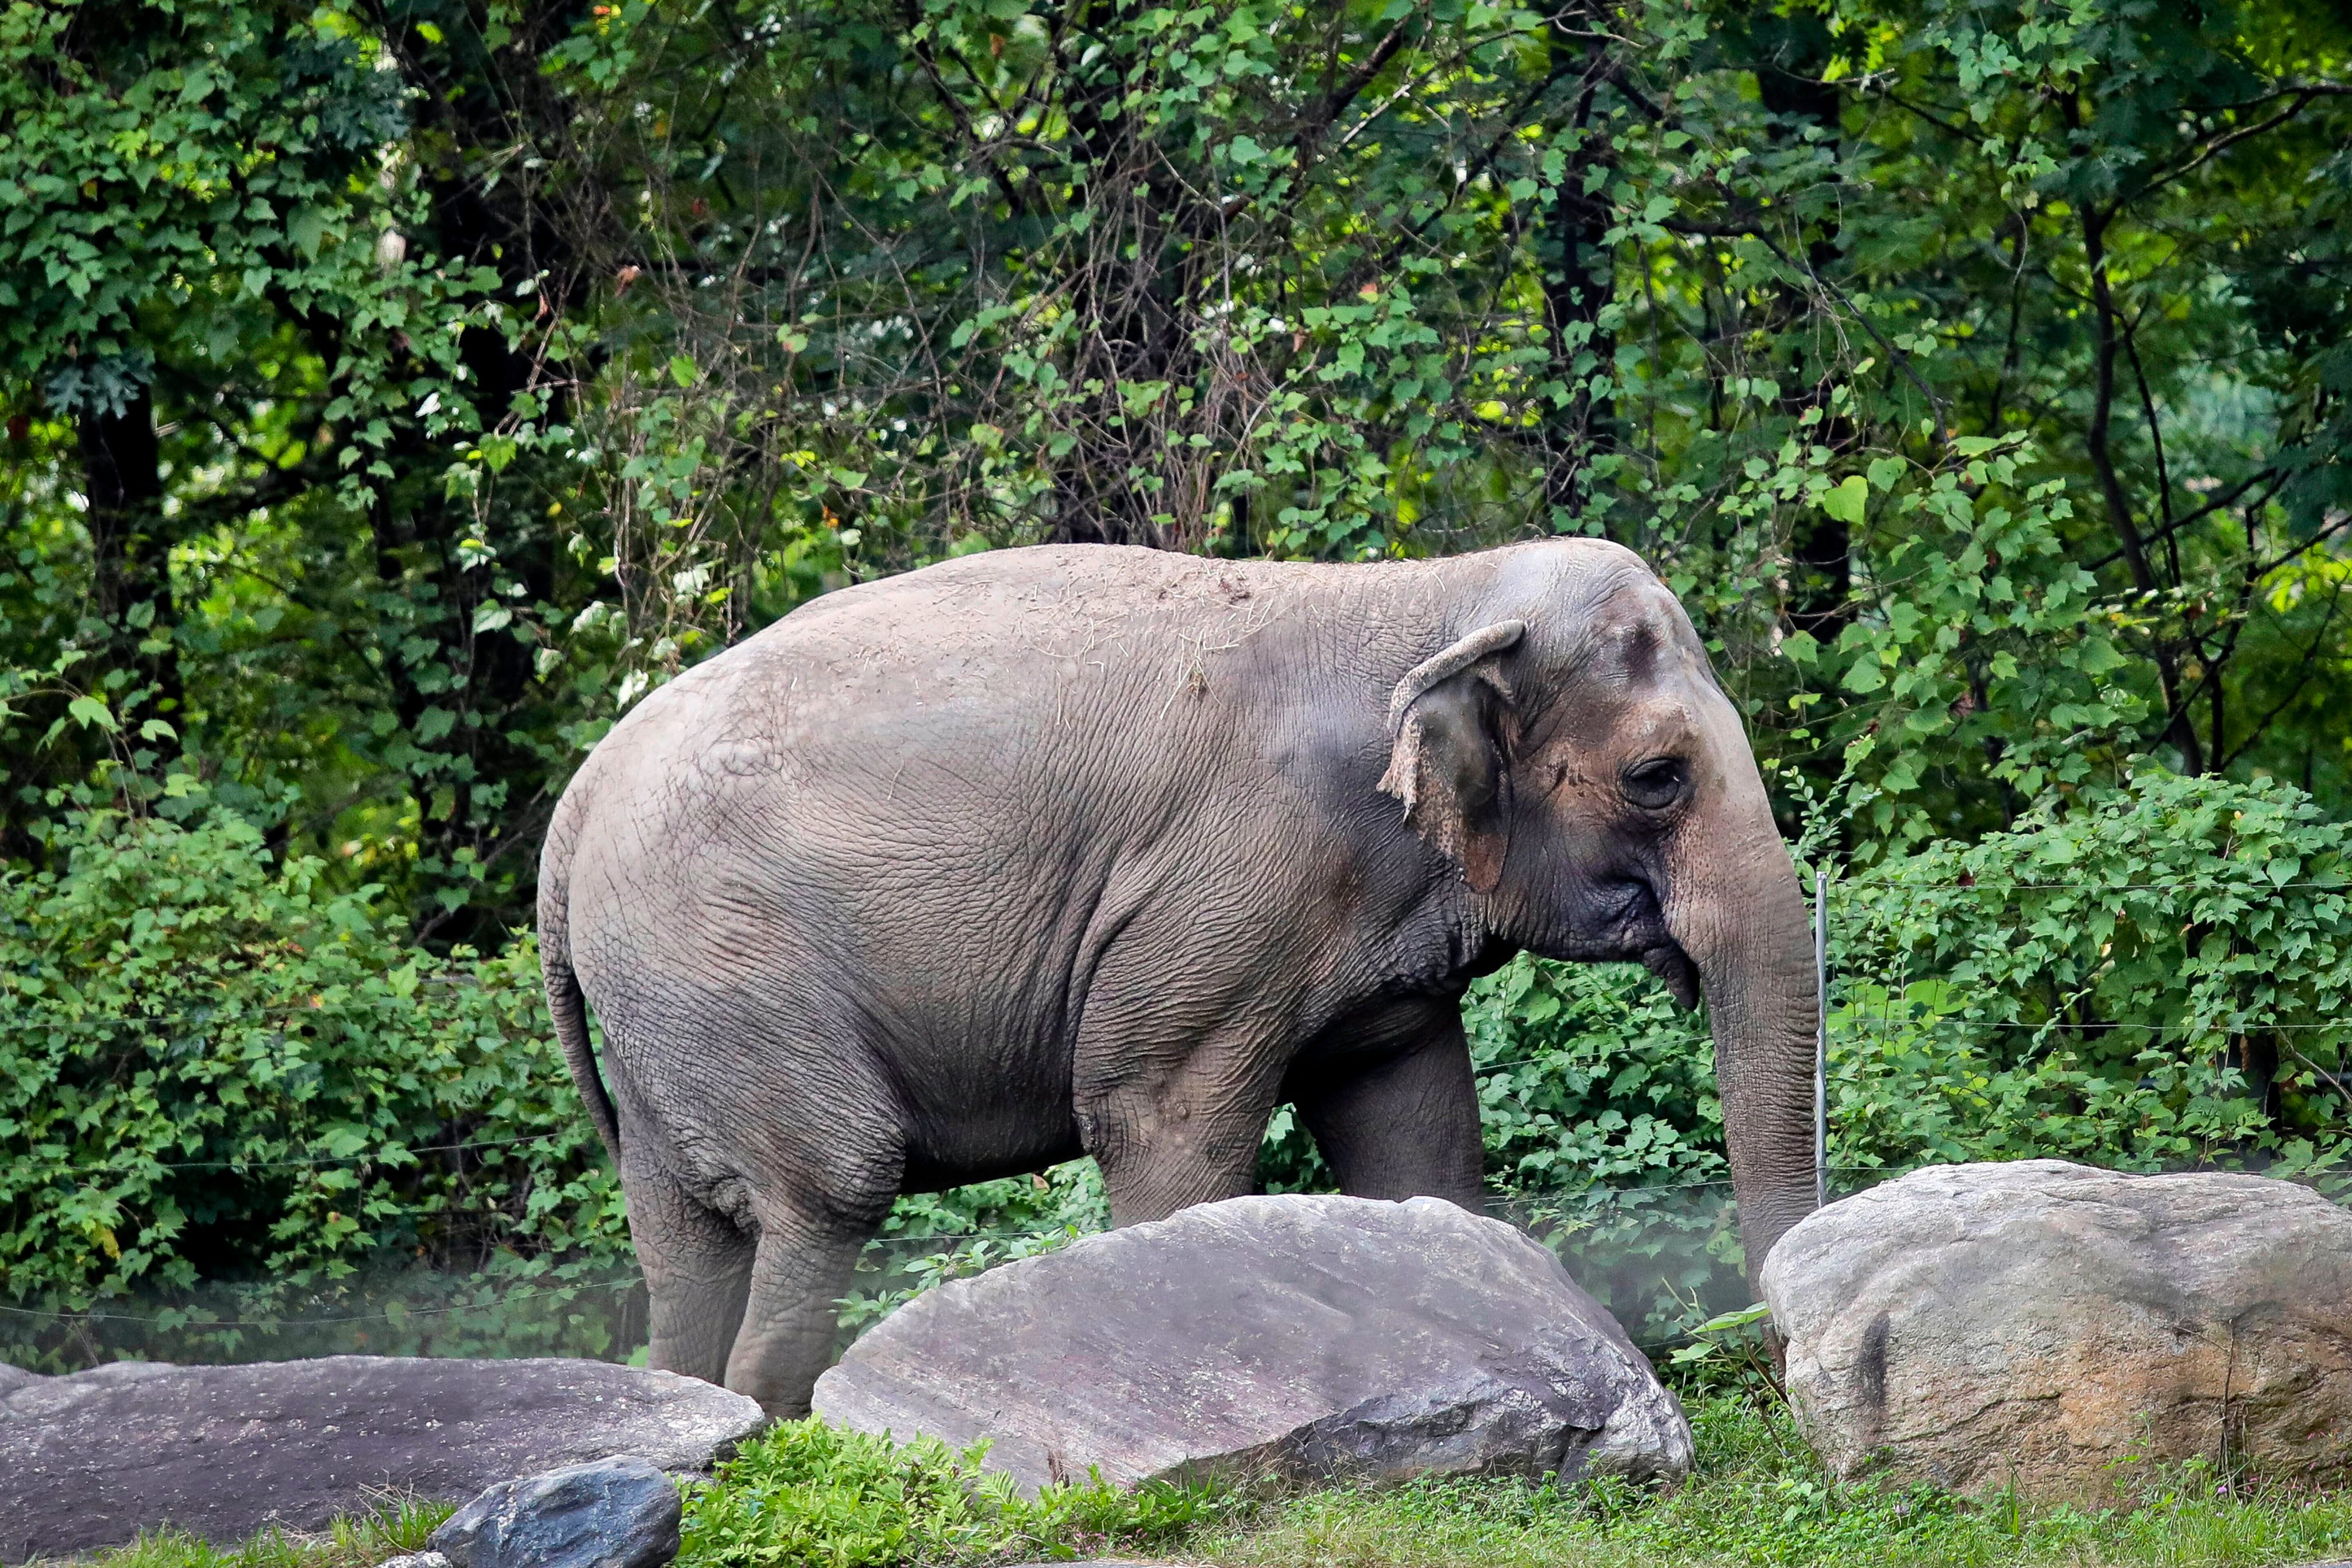 The elephant Happy strolls inside its habitat in the Bronx Zoo on October 2, 2018. New York’s top court has rejected an effort to free Happy from the zoo, ruling that it does not meet the definition of a person who is being illegally confined. Photo: AP